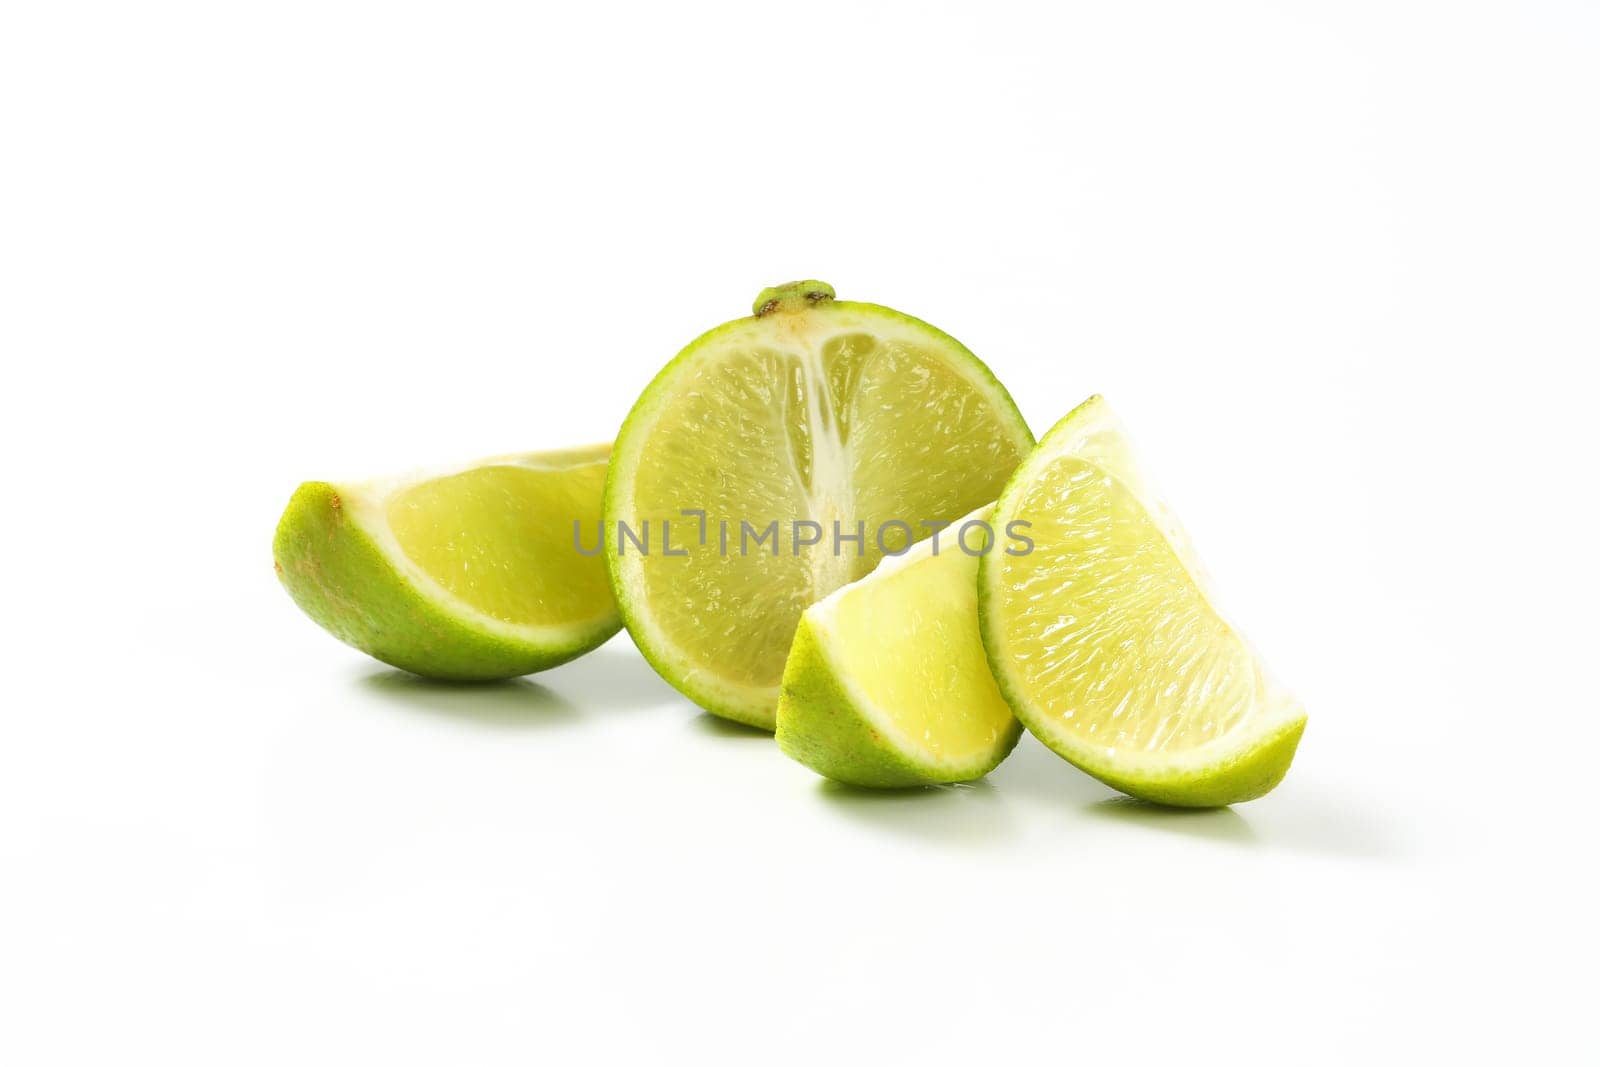 Half and wedges of fresh lime fruit on white background